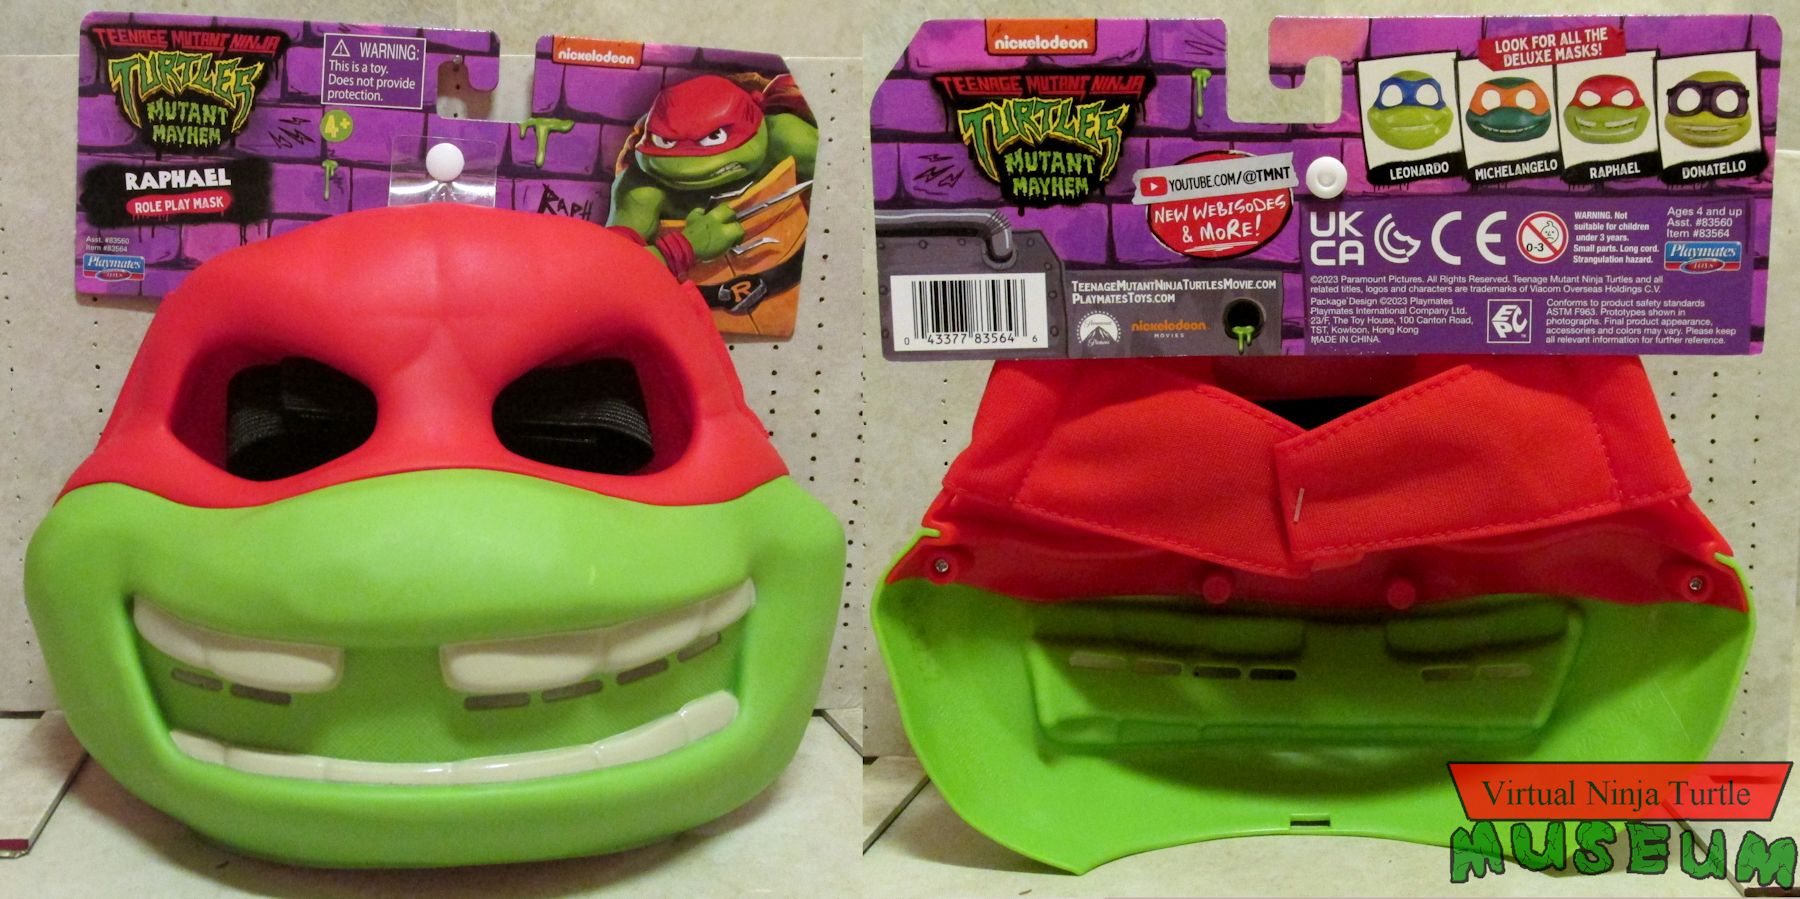 Raphael Mask front and back